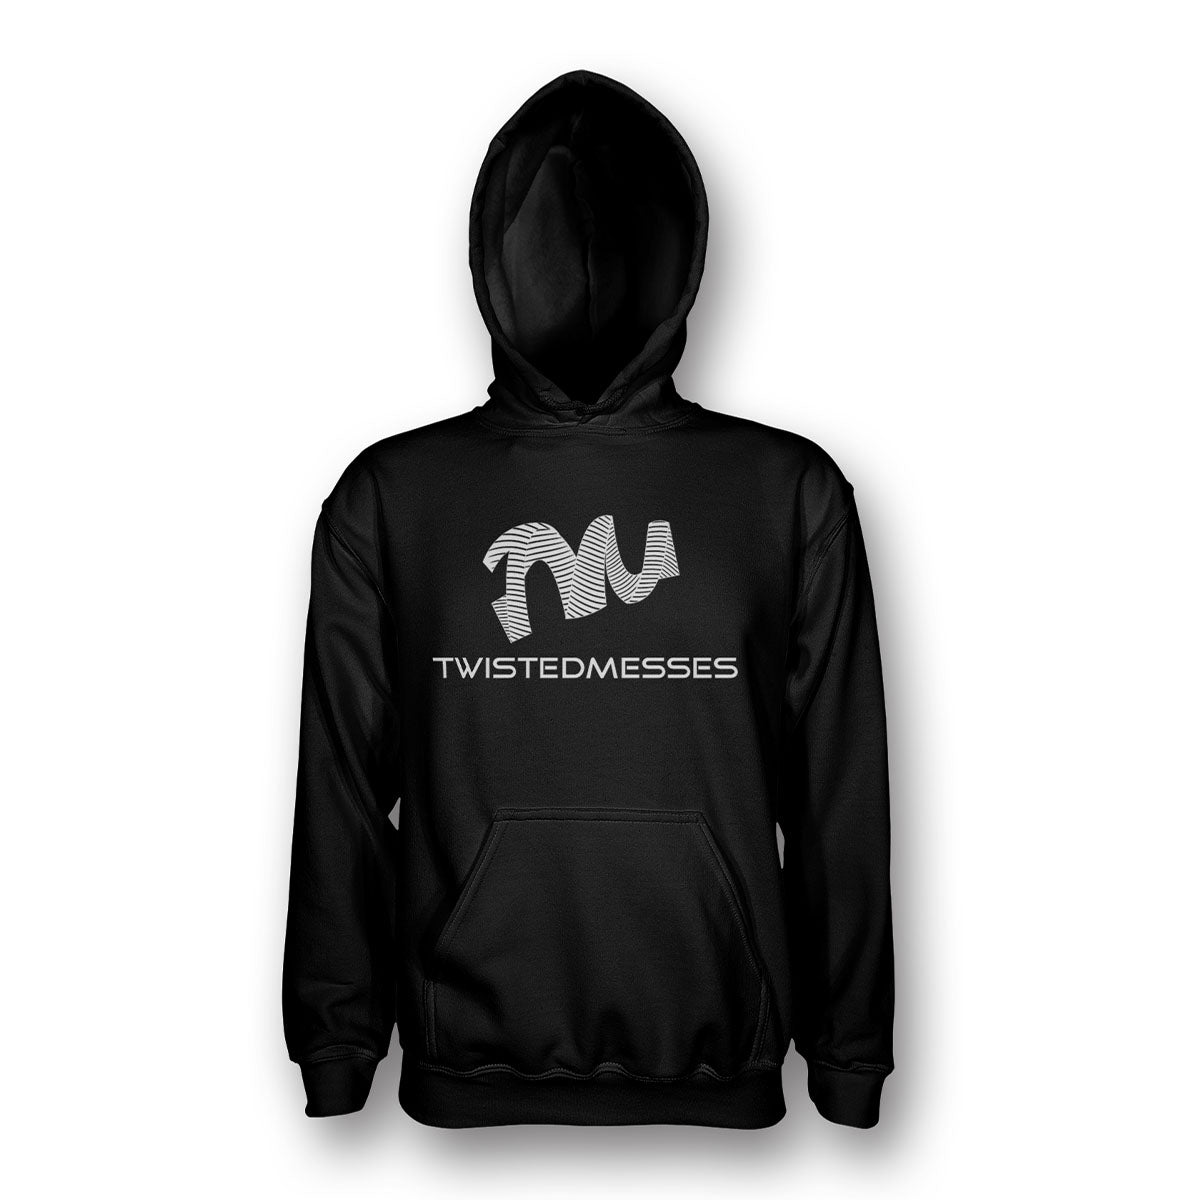 Hoodie Black/White by Twisted Messes